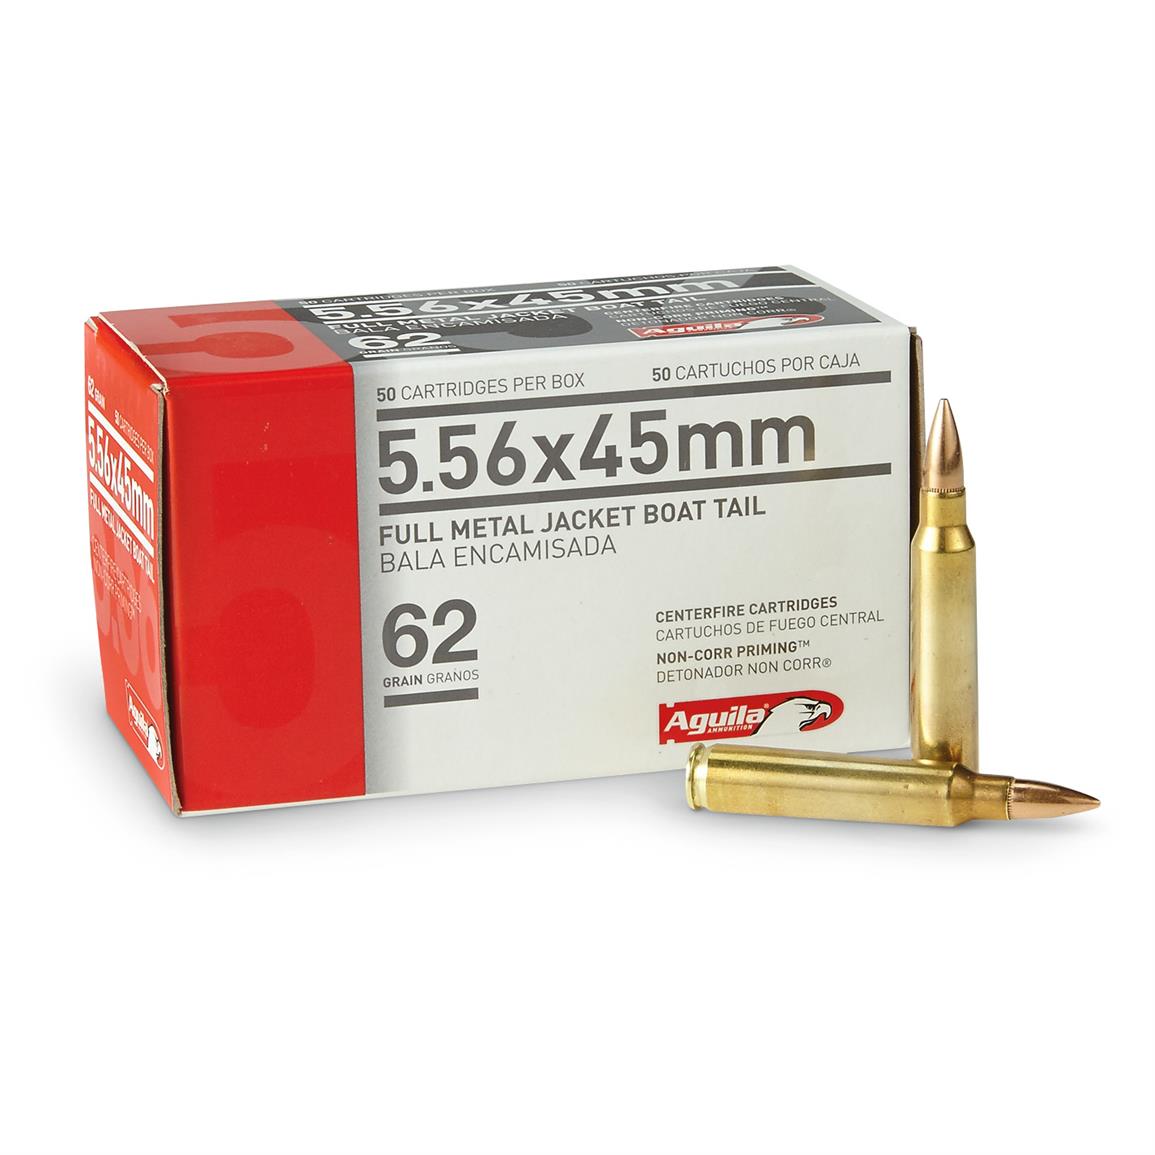 50 rounds of Aguila .223 5.56x45mm 62 Grain FMJBT Ammo